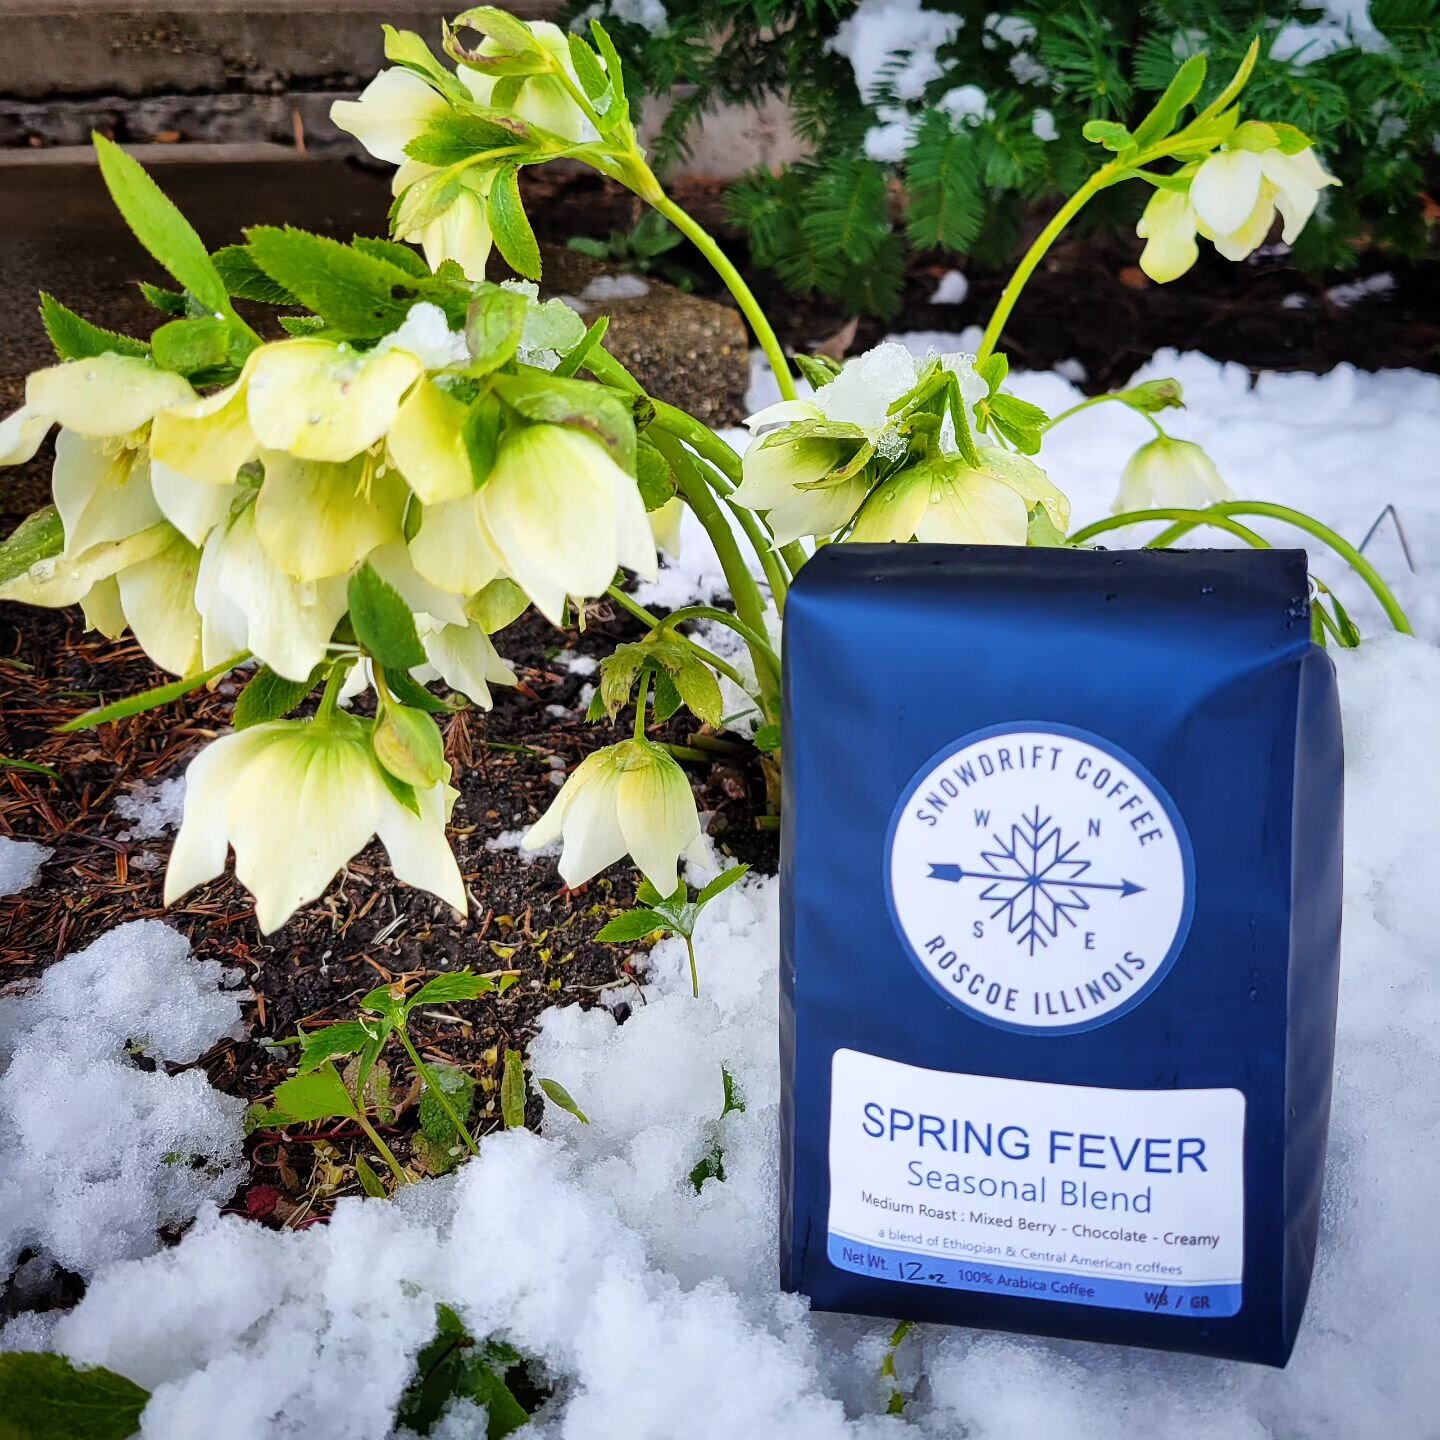 ❄️ Spring is here! ❄️

It's Illinois, so of course we'll get 6 inches of snow at the end of March! 

But, no worries! Our Spring Fever Seasonal Blend is here to cozy up to. 

We've designed this blend using coffees from Ethiopia &amp; Mexico to be cr